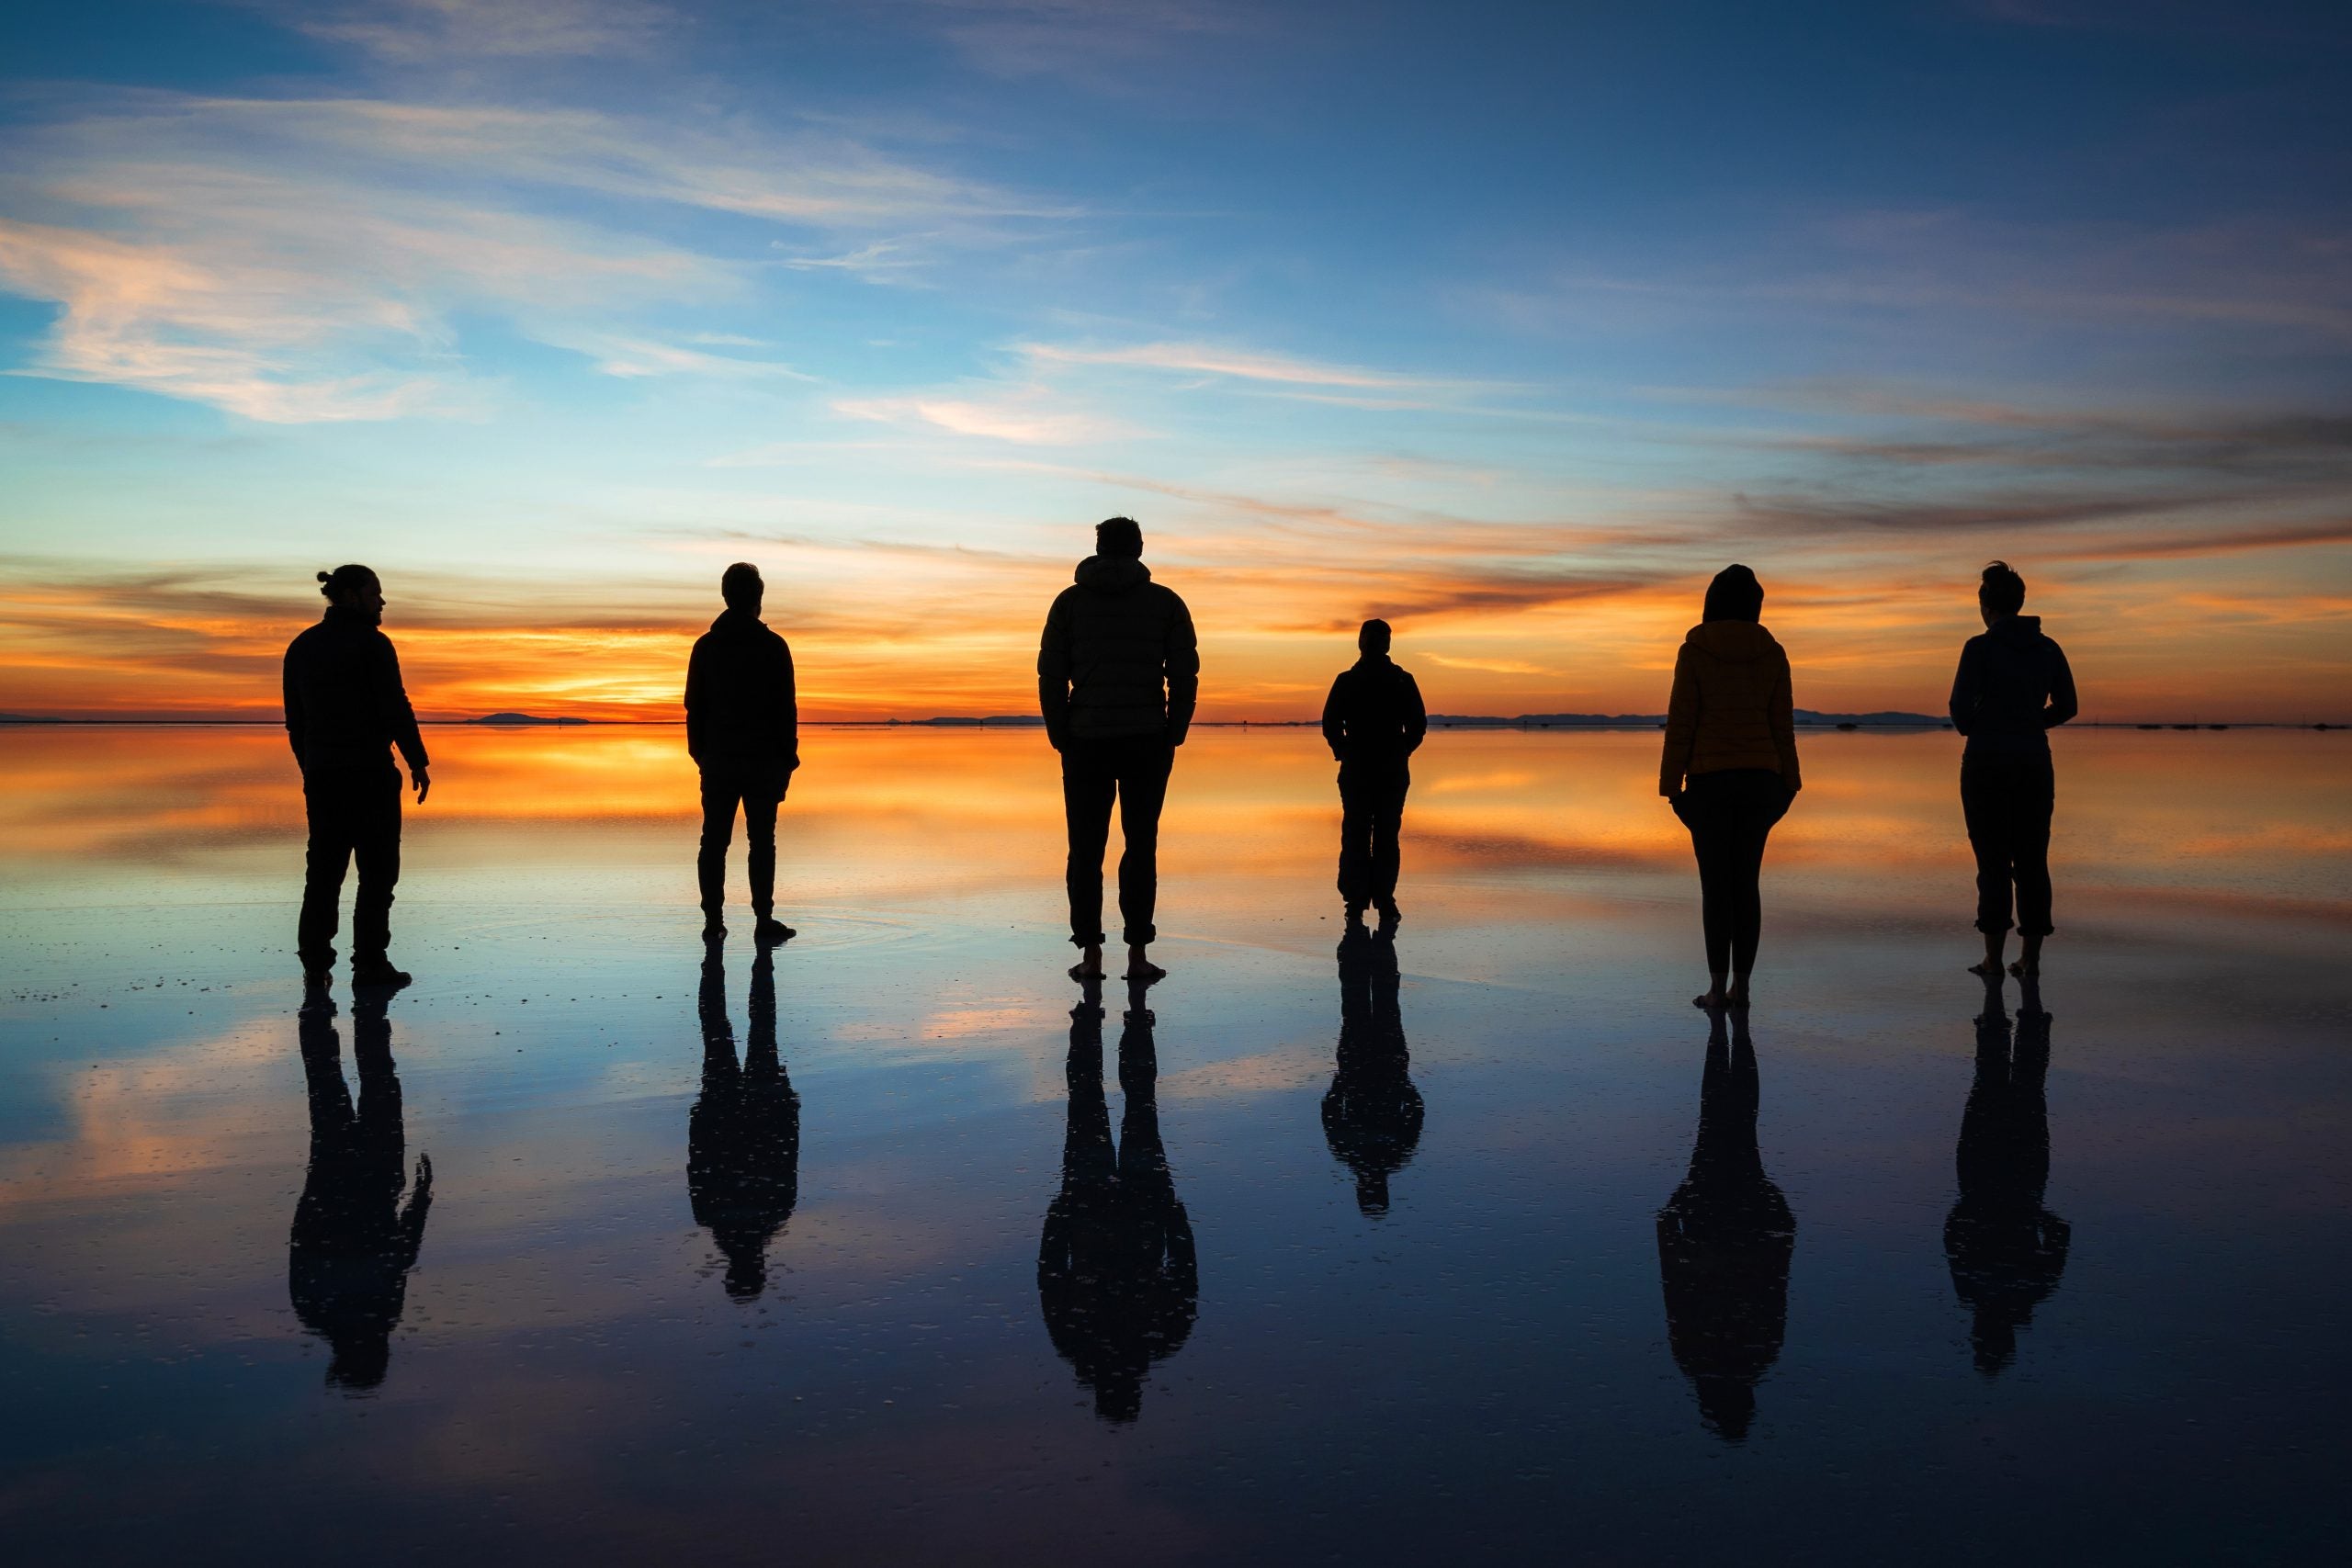 Diverse,Group,Of,People,Against,Sunrise,,Silhouette,Of,Travellers,At